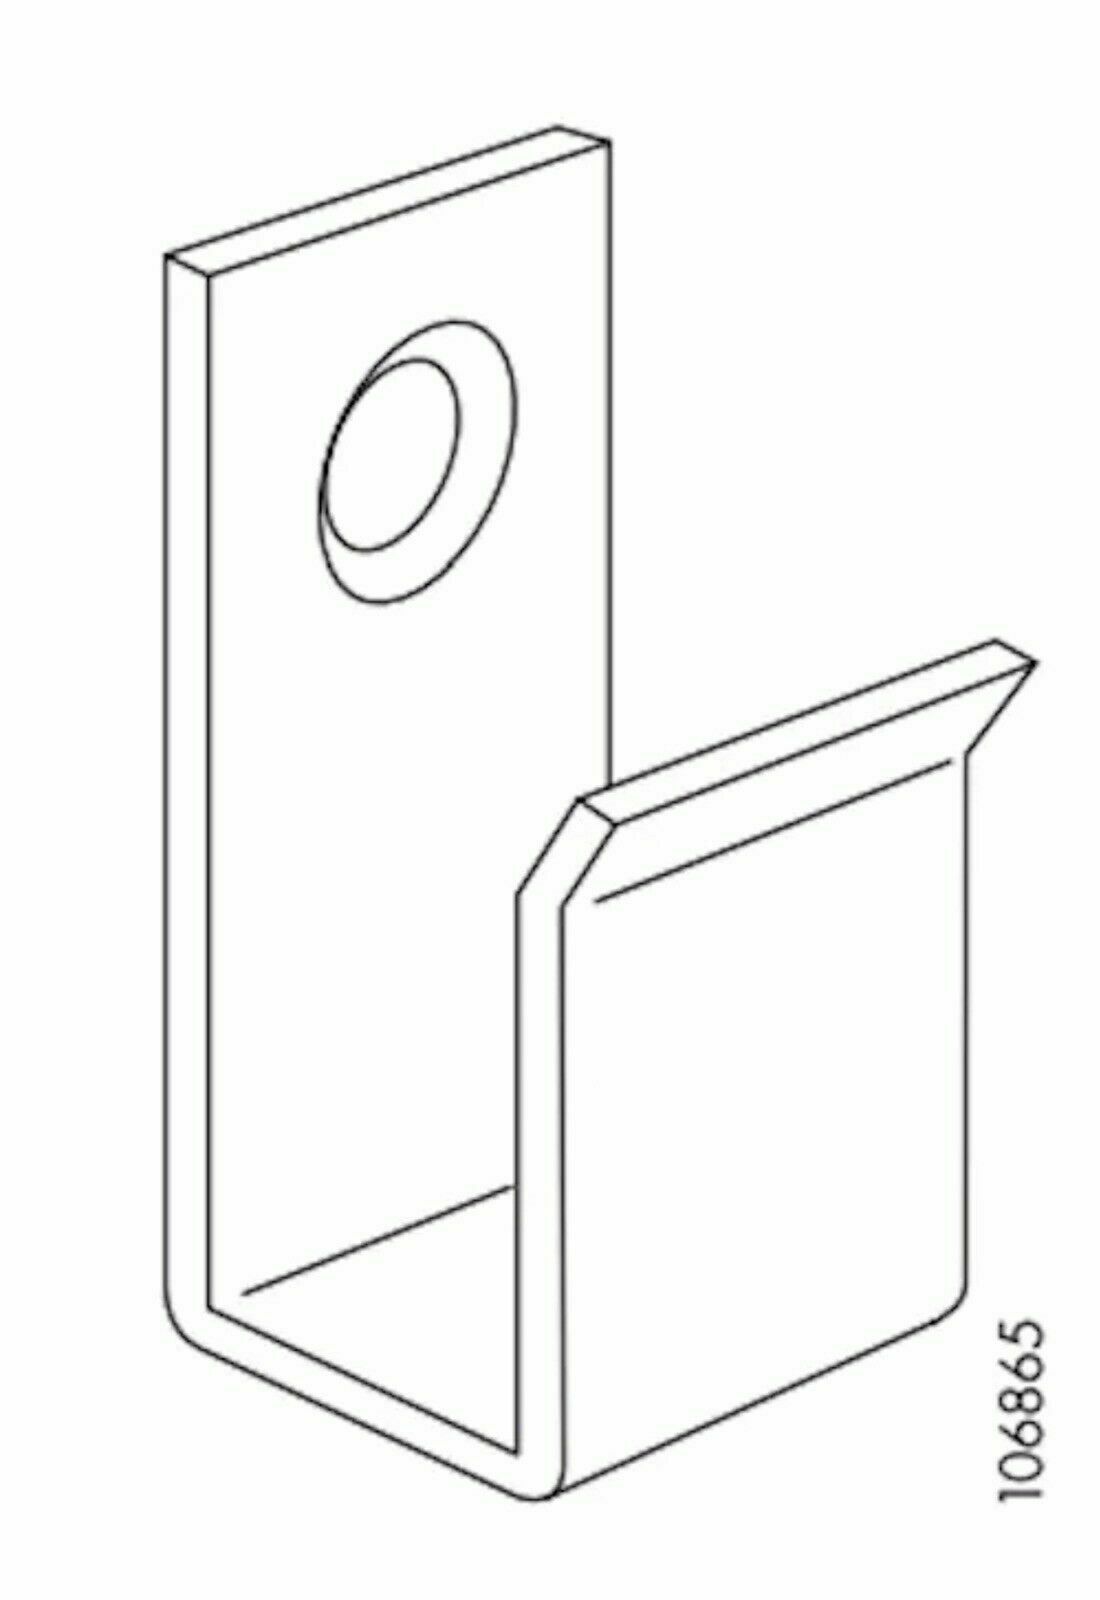 IKEA Part # 106865 Holding Angled Support for Karlstad Sofa Replacement Parts